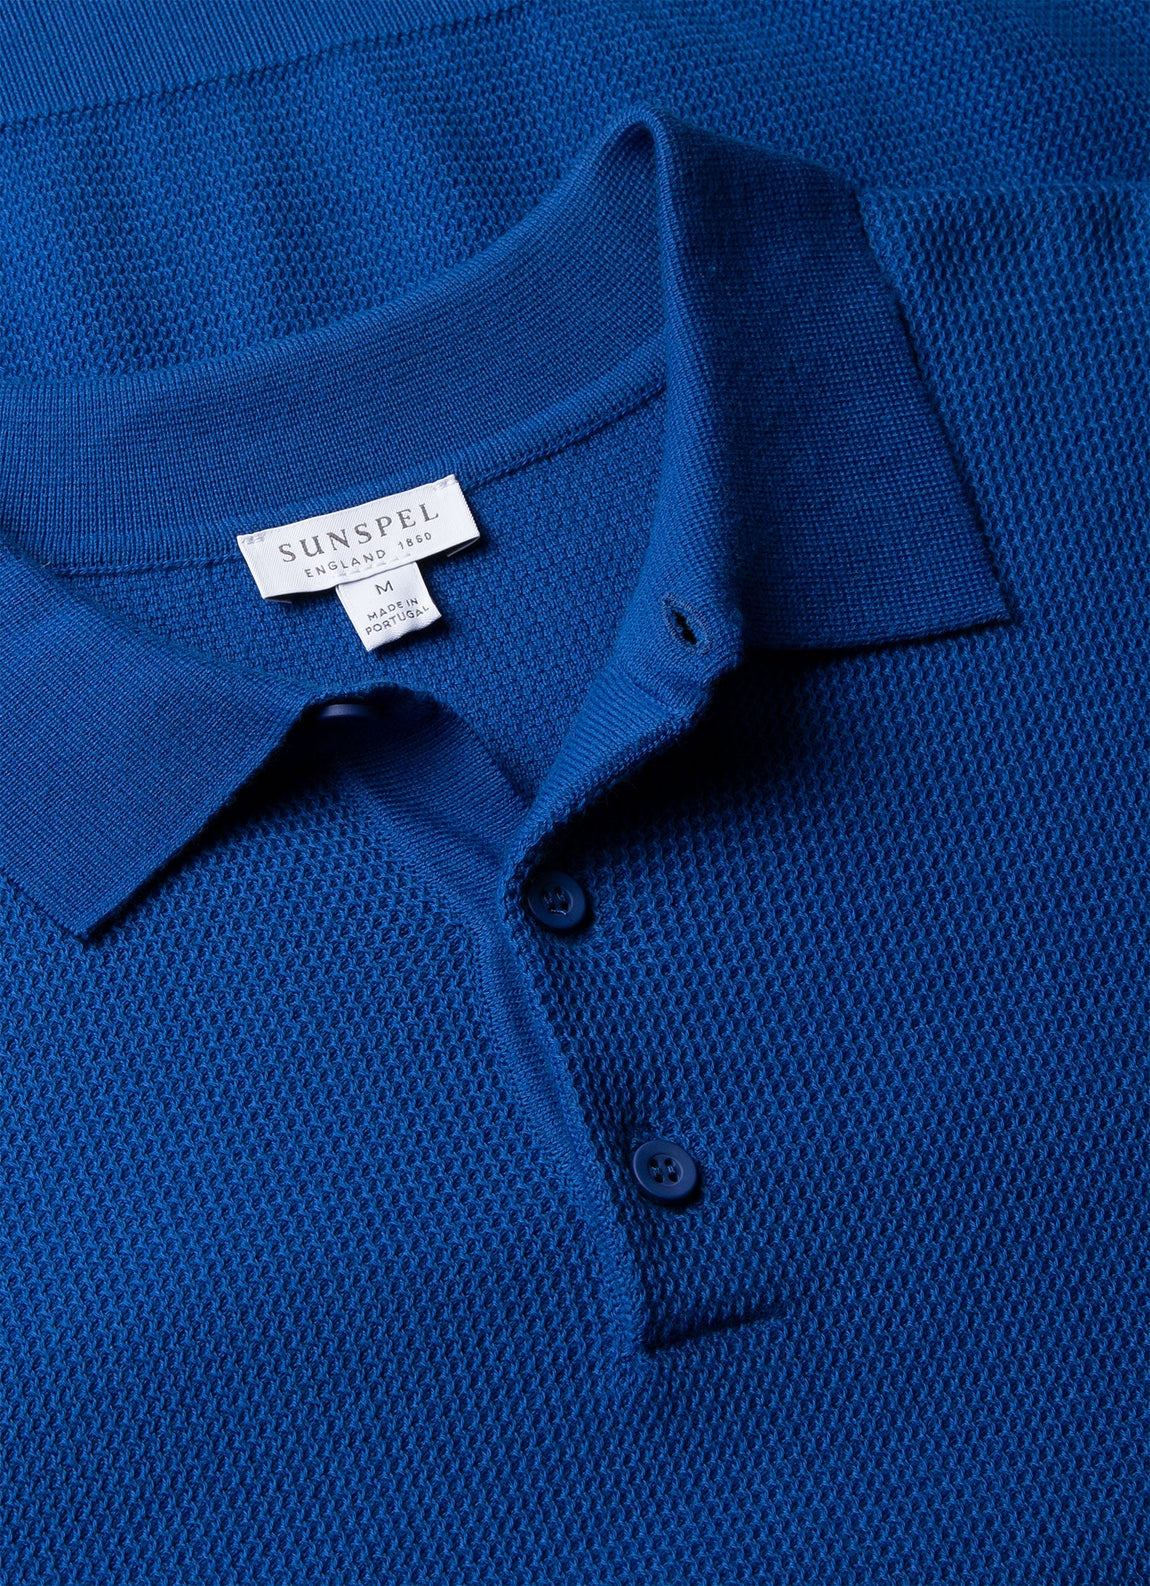 Men's Sunspel x MR PORTER Racked Stitch Polo Shirt in French Blue